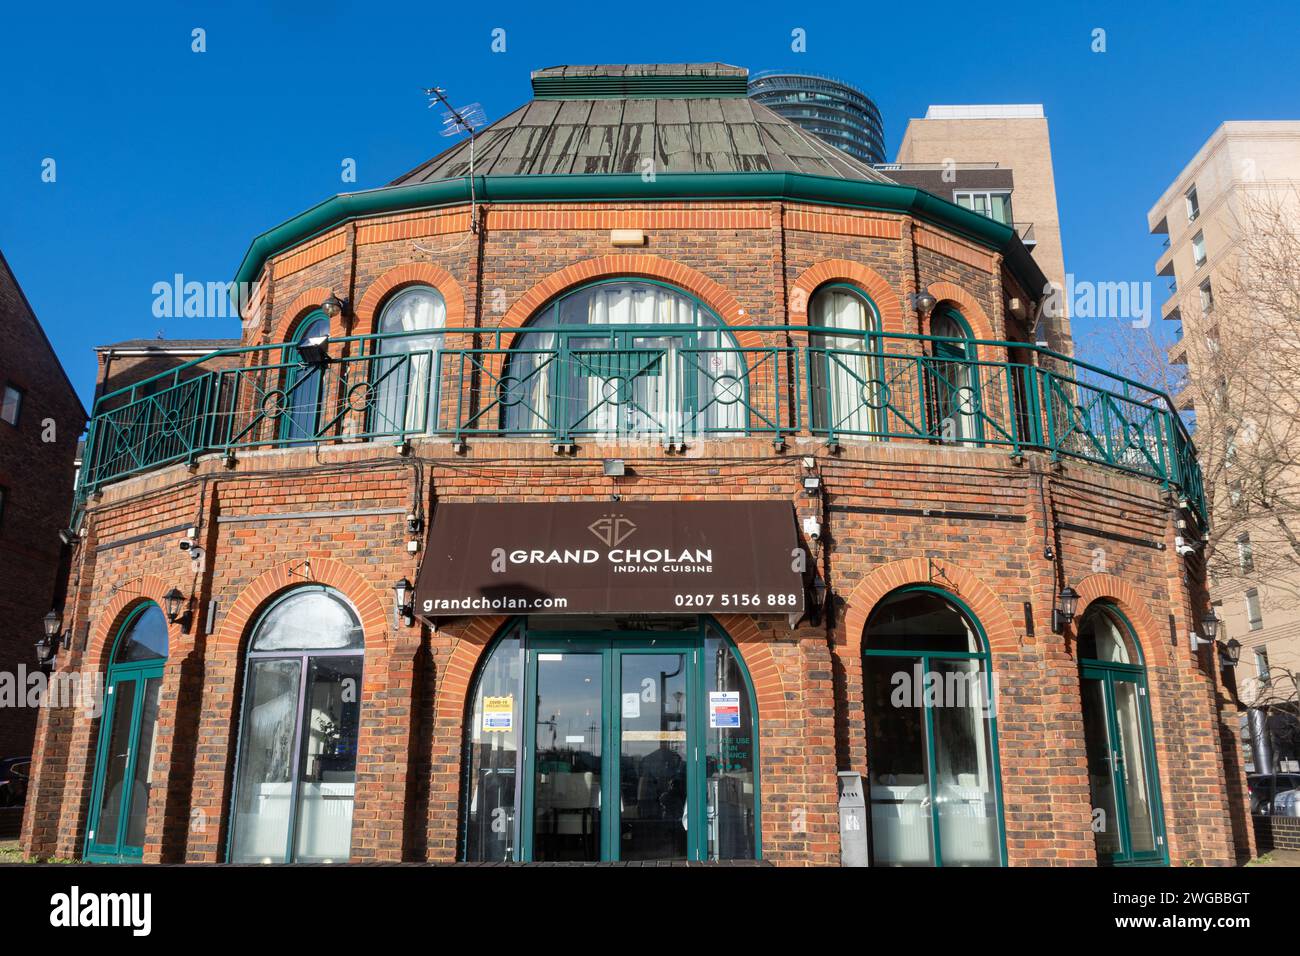 Grand Cholan Indian Cuisine Restaurant on the Isle of Dogs, London Docklands area, Inghilterra, Regno Unito Foto Stock